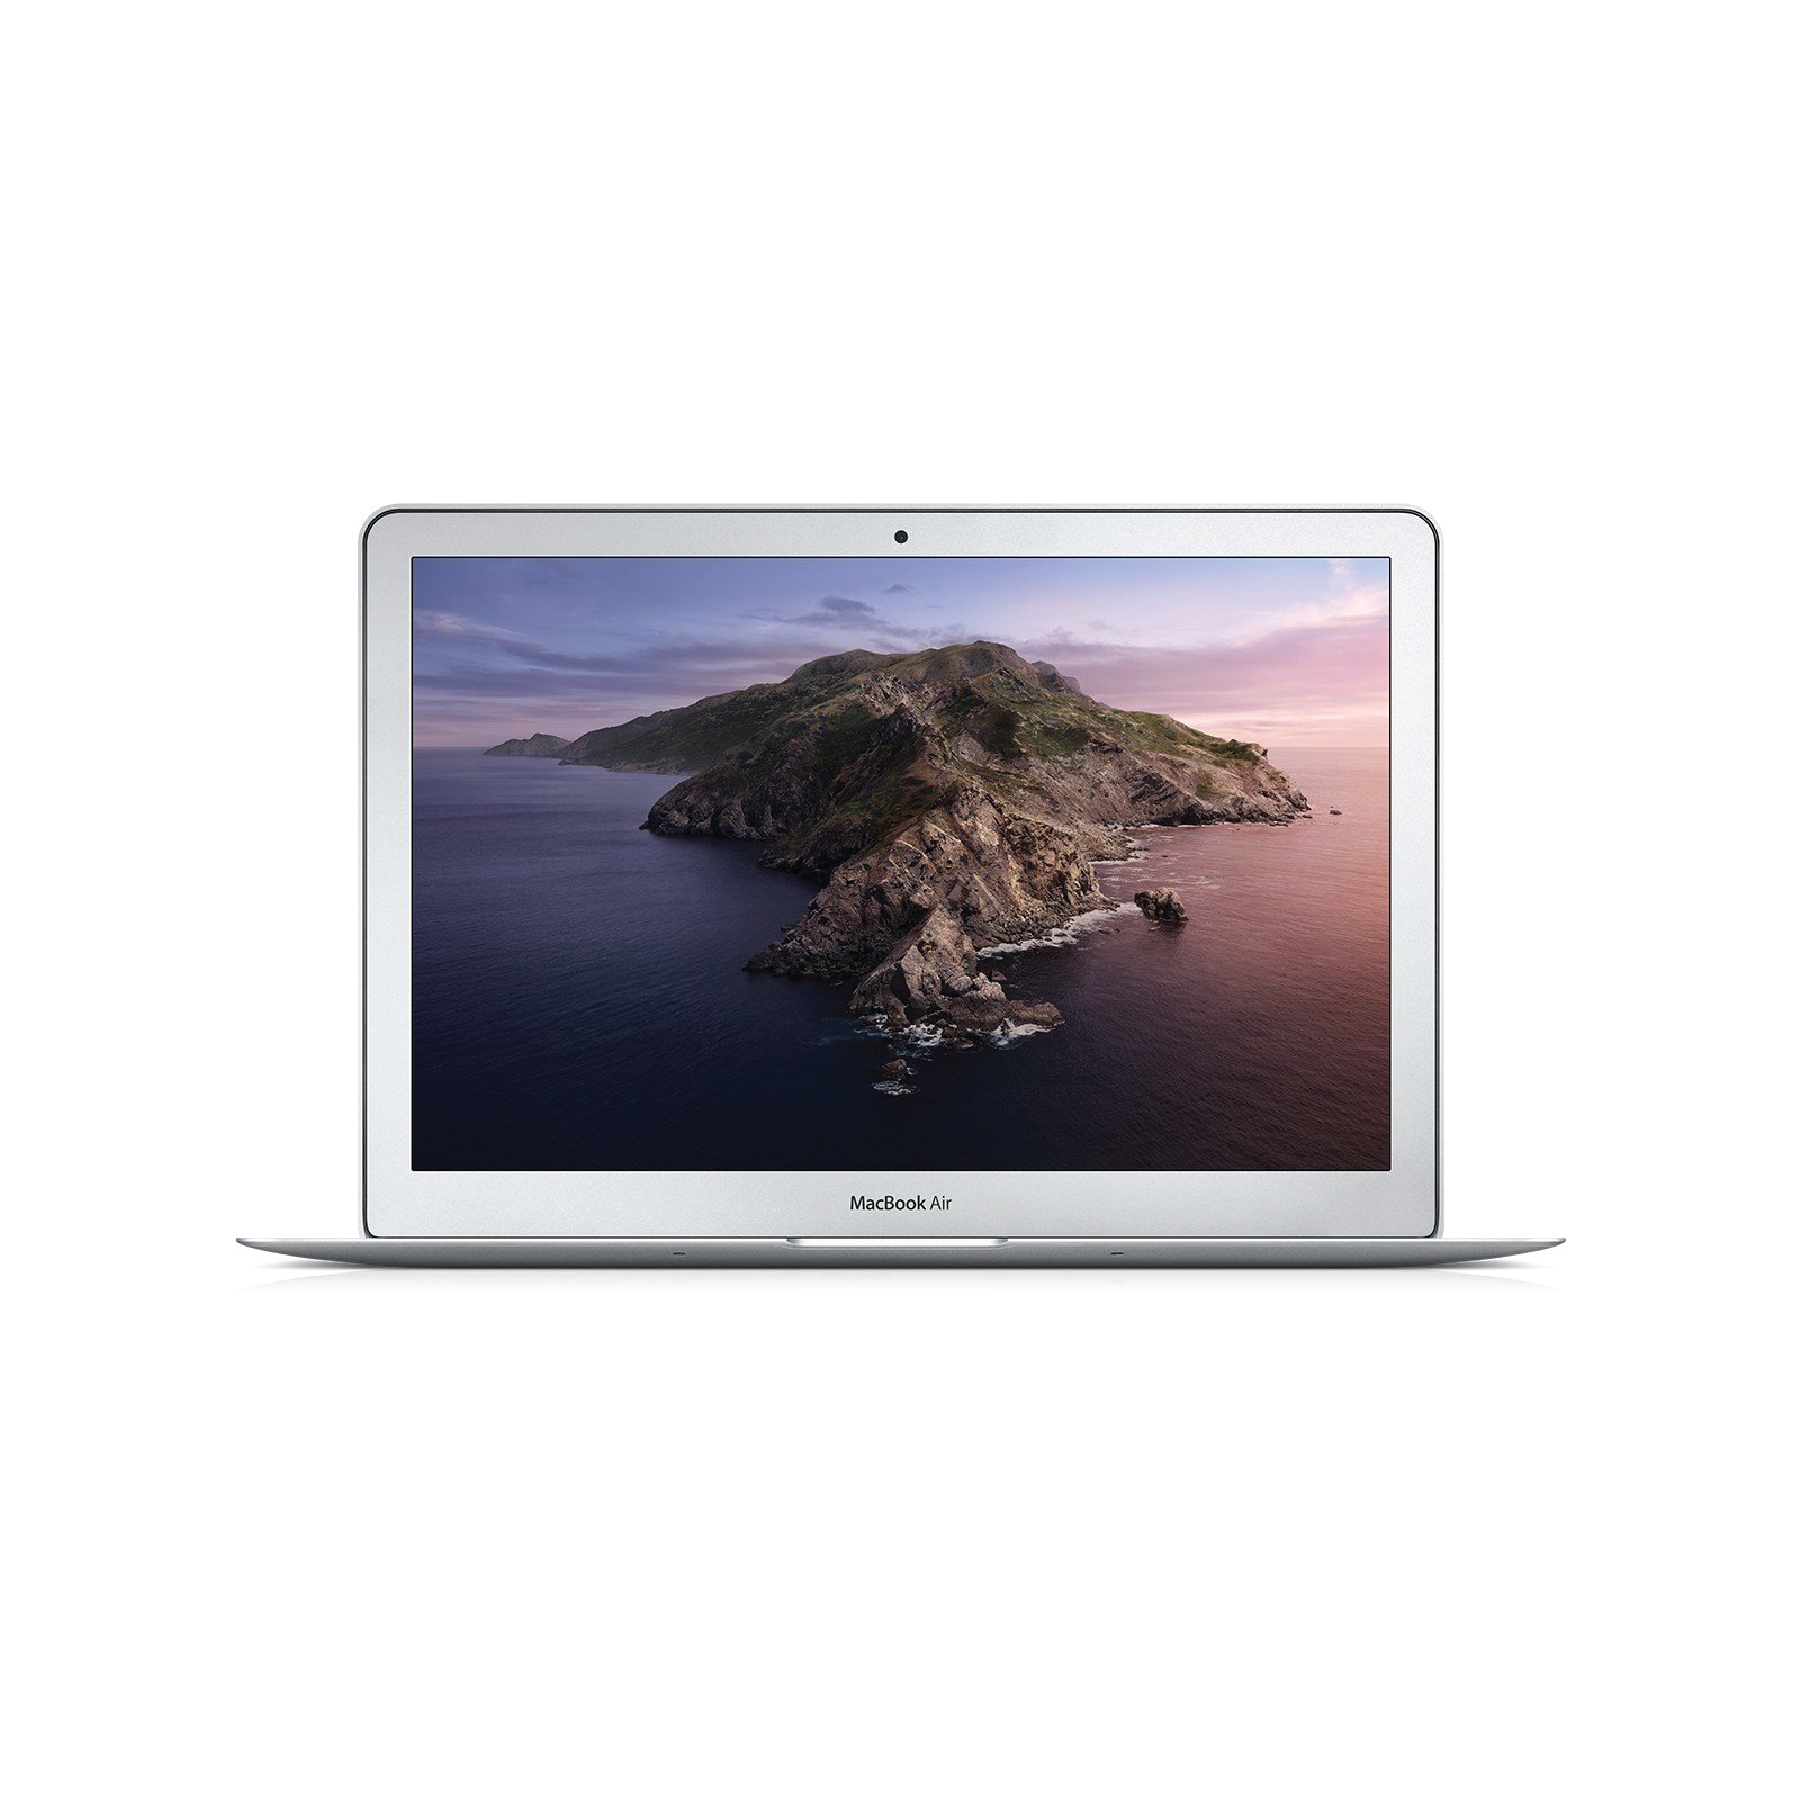 MacBook Air (13-inch, Early 2015) 1.6GHz, Intel Core i5 128GB - Silver (Good) - iStore Pre-owned